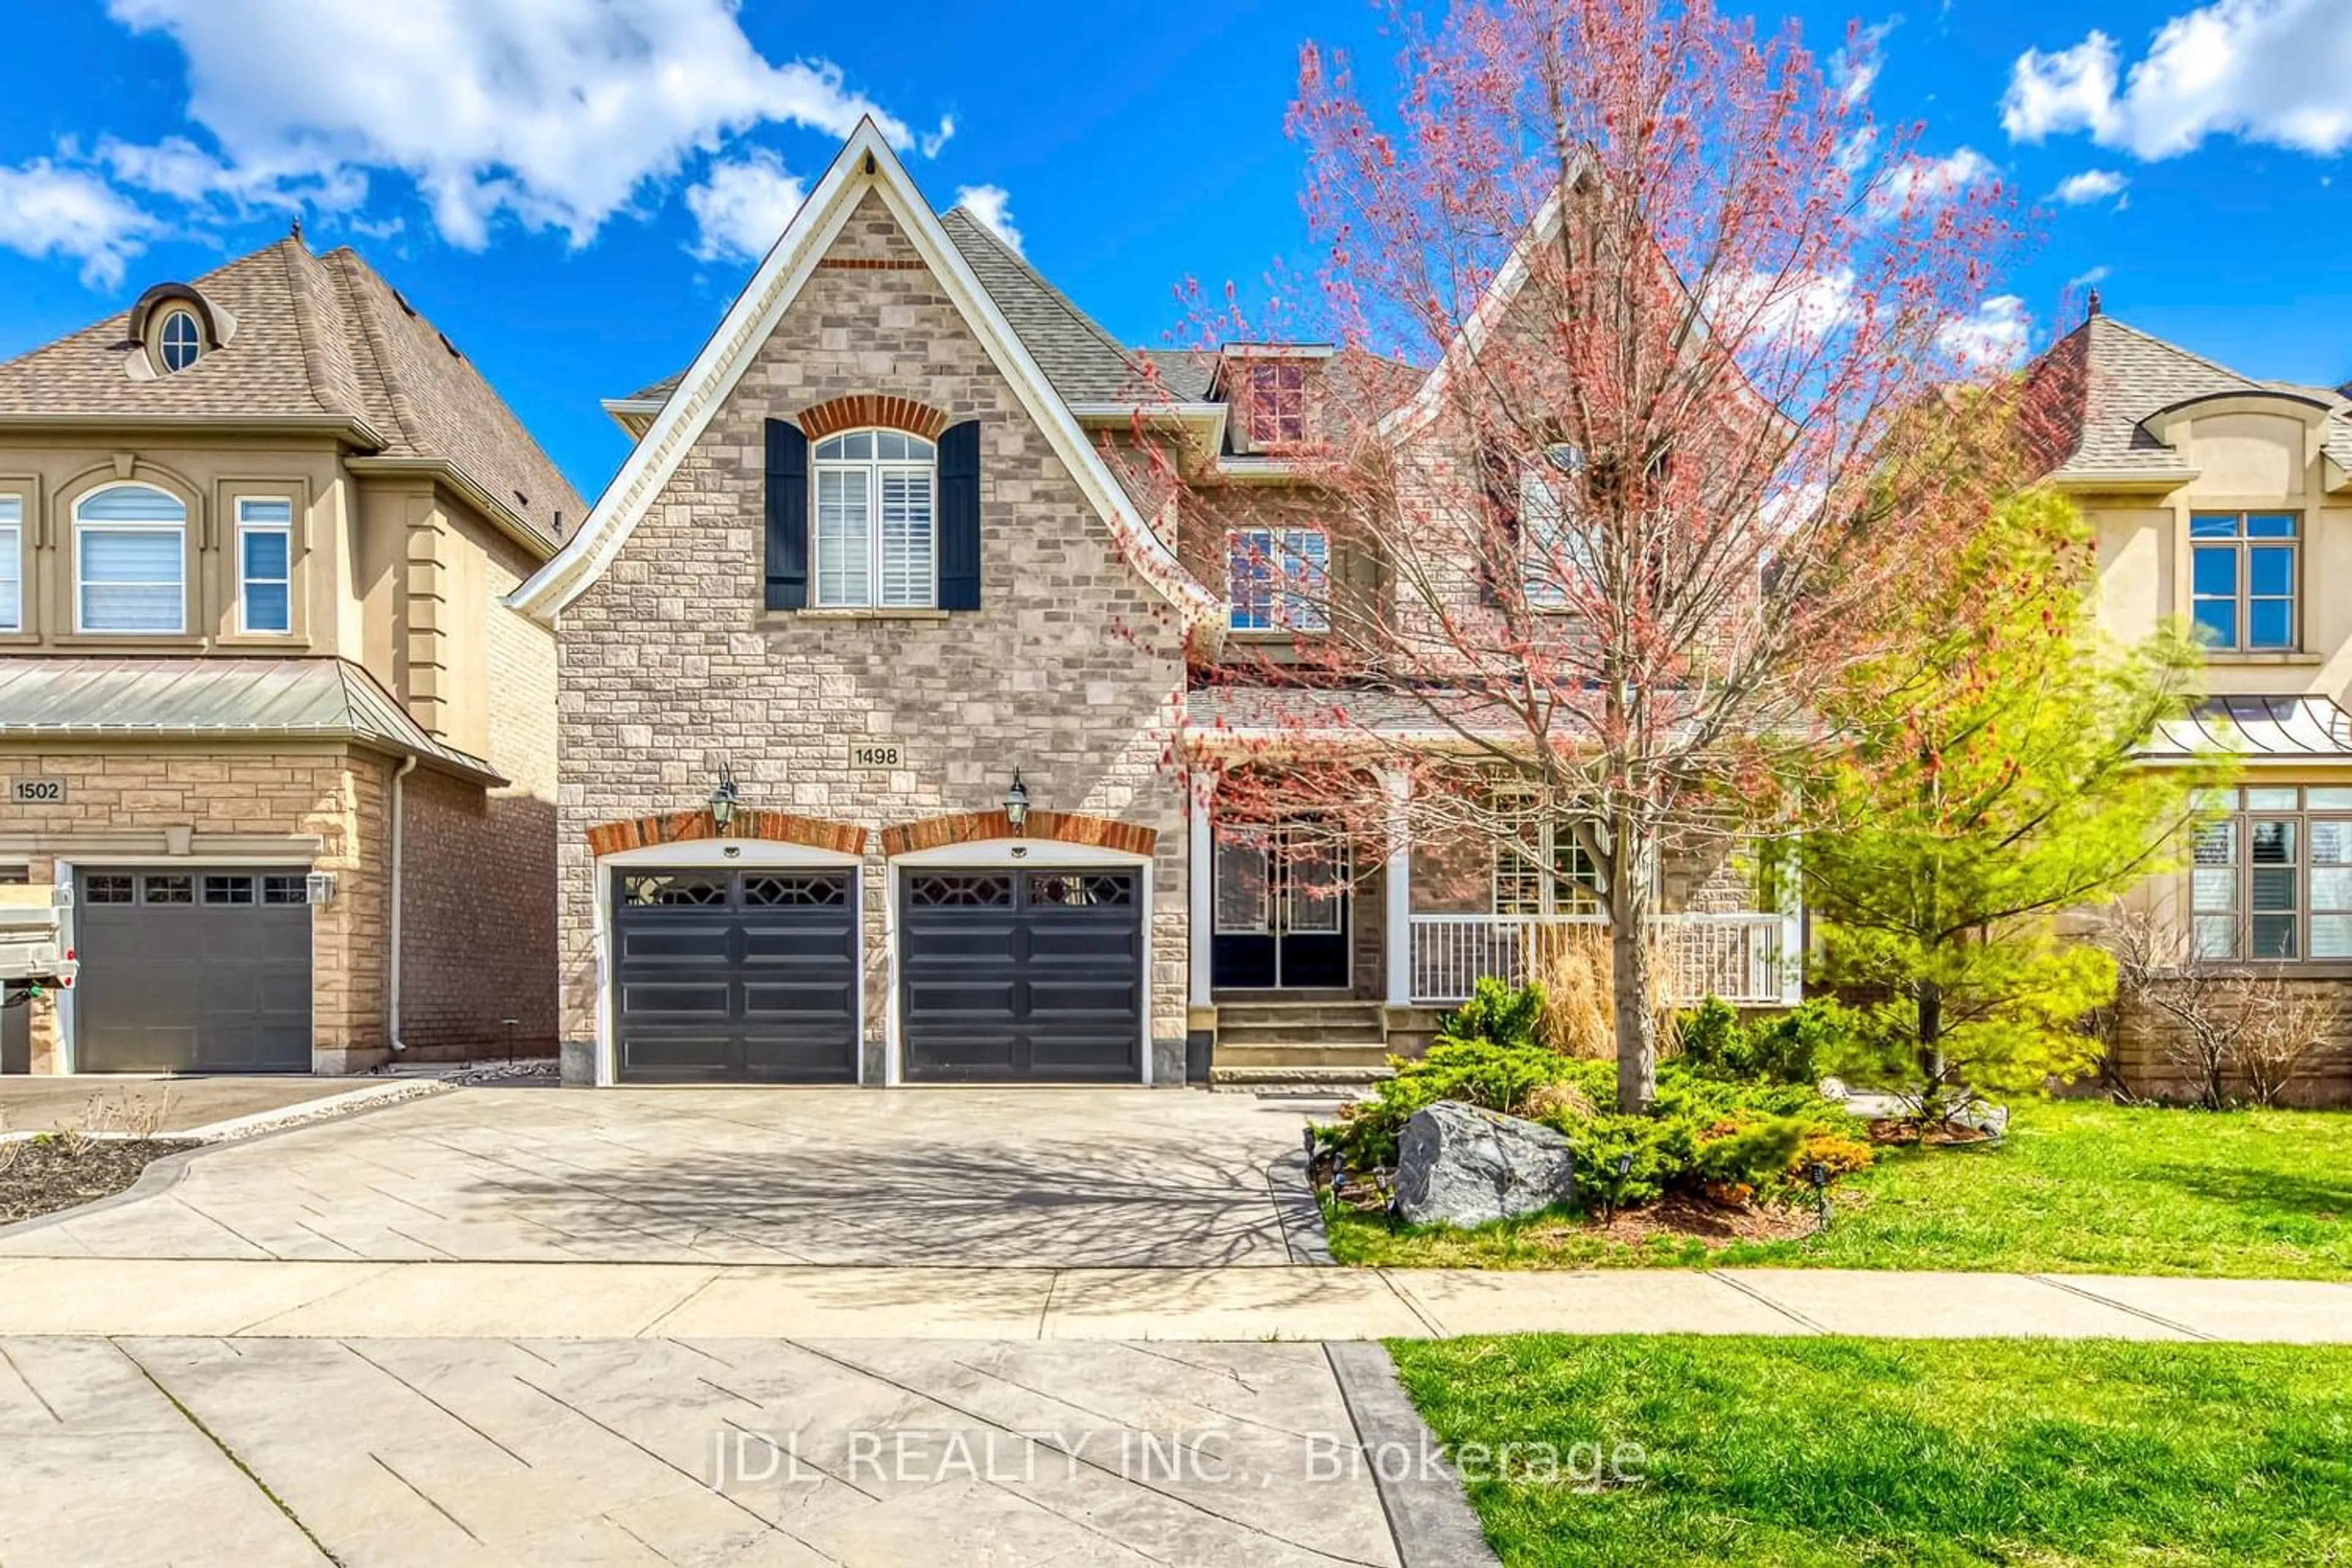 Home with brick exterior material for 1498 Arrowhead Rd, Oakville Ontario L6H 7V6